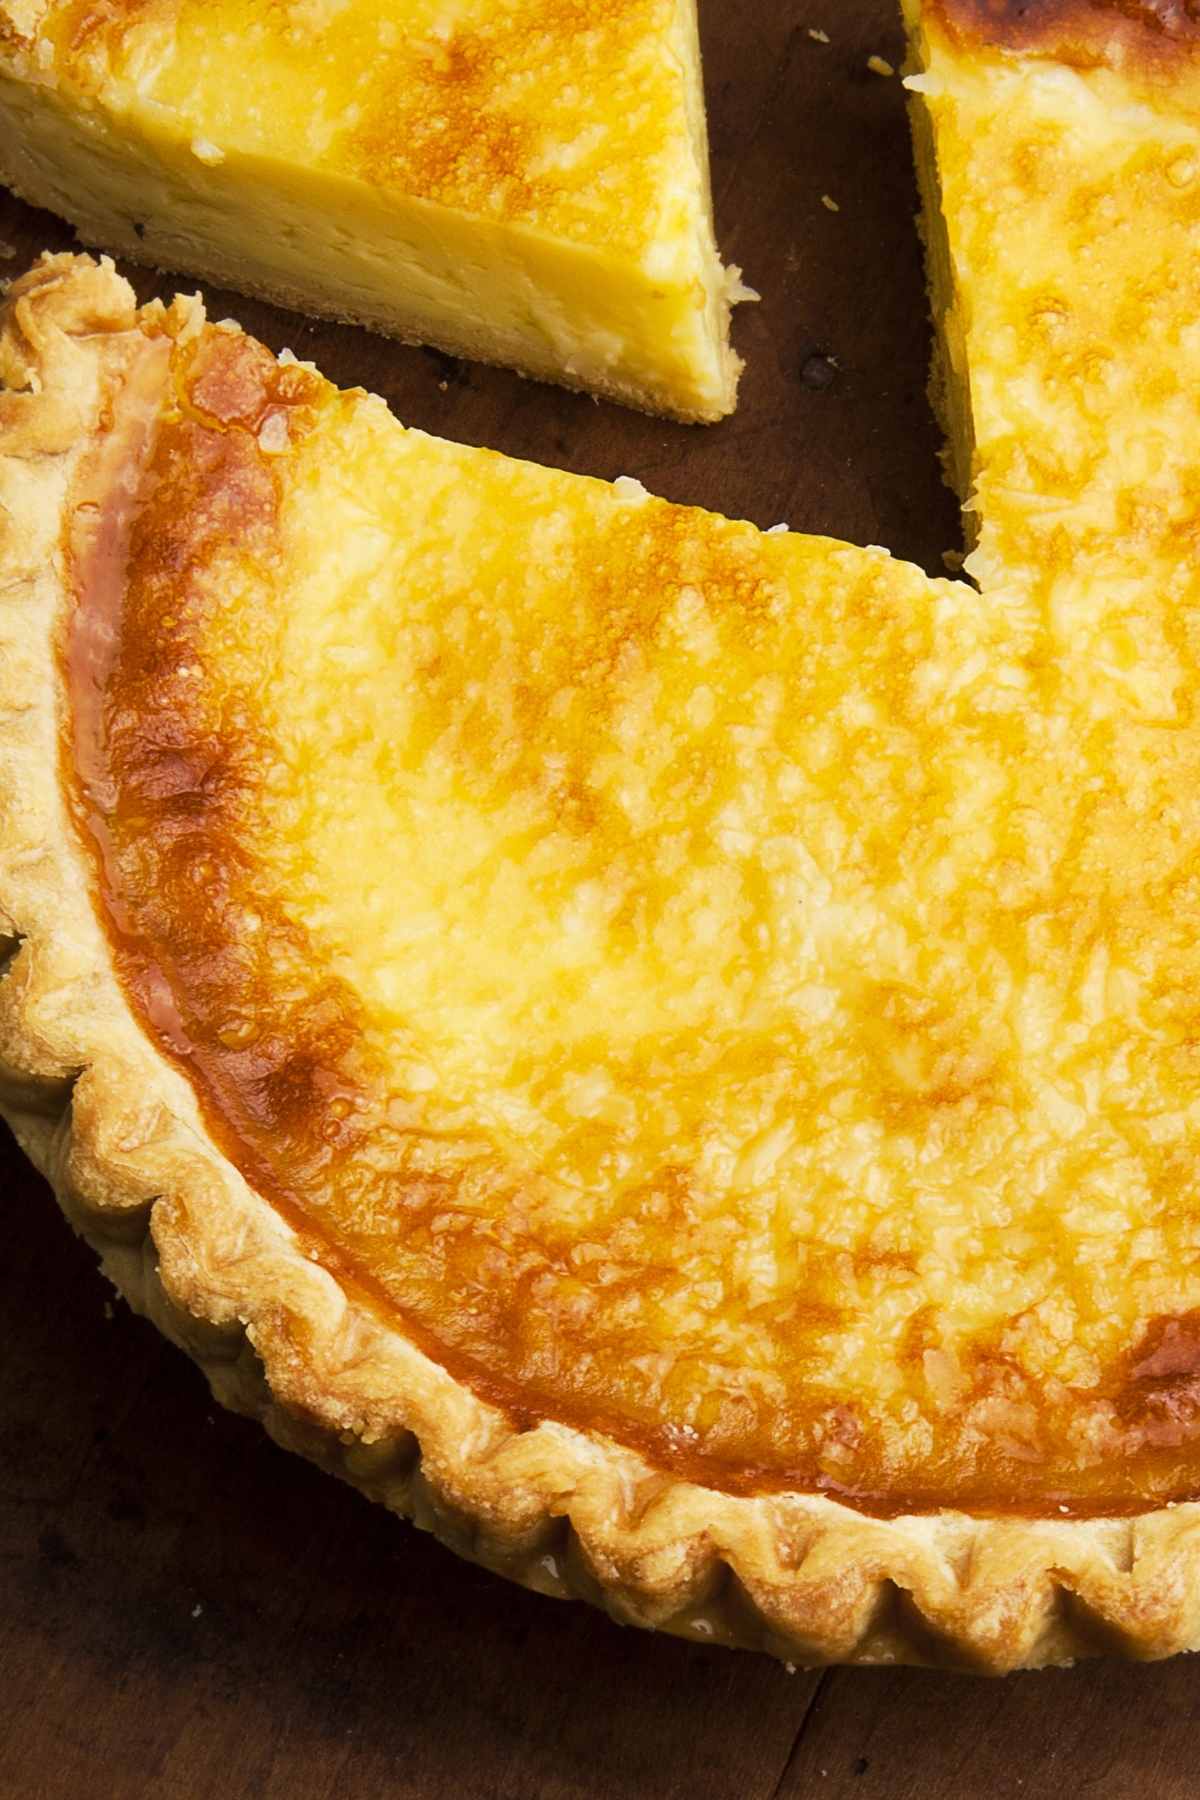 This homemade egg custard pie is creamy and delicious. It’s a Southern classic that’s a welcome addition to any meal.